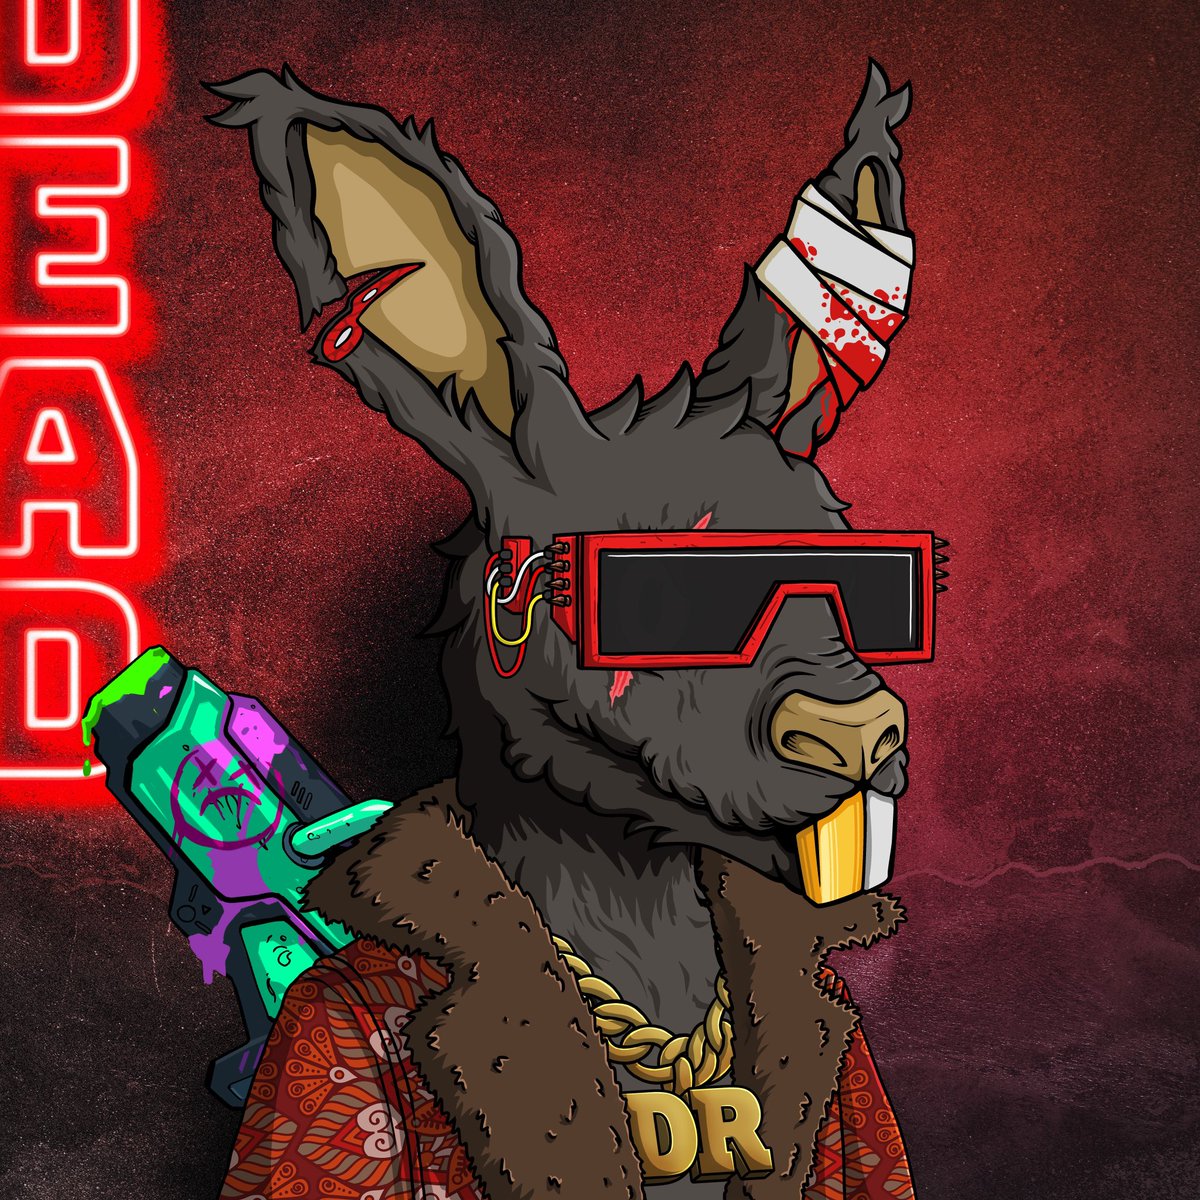 Holy shiz Love these rabbits @DeadRabbitRS Especially SUPREME @discosolaris combo (#deadpaint) Final equips rolling out